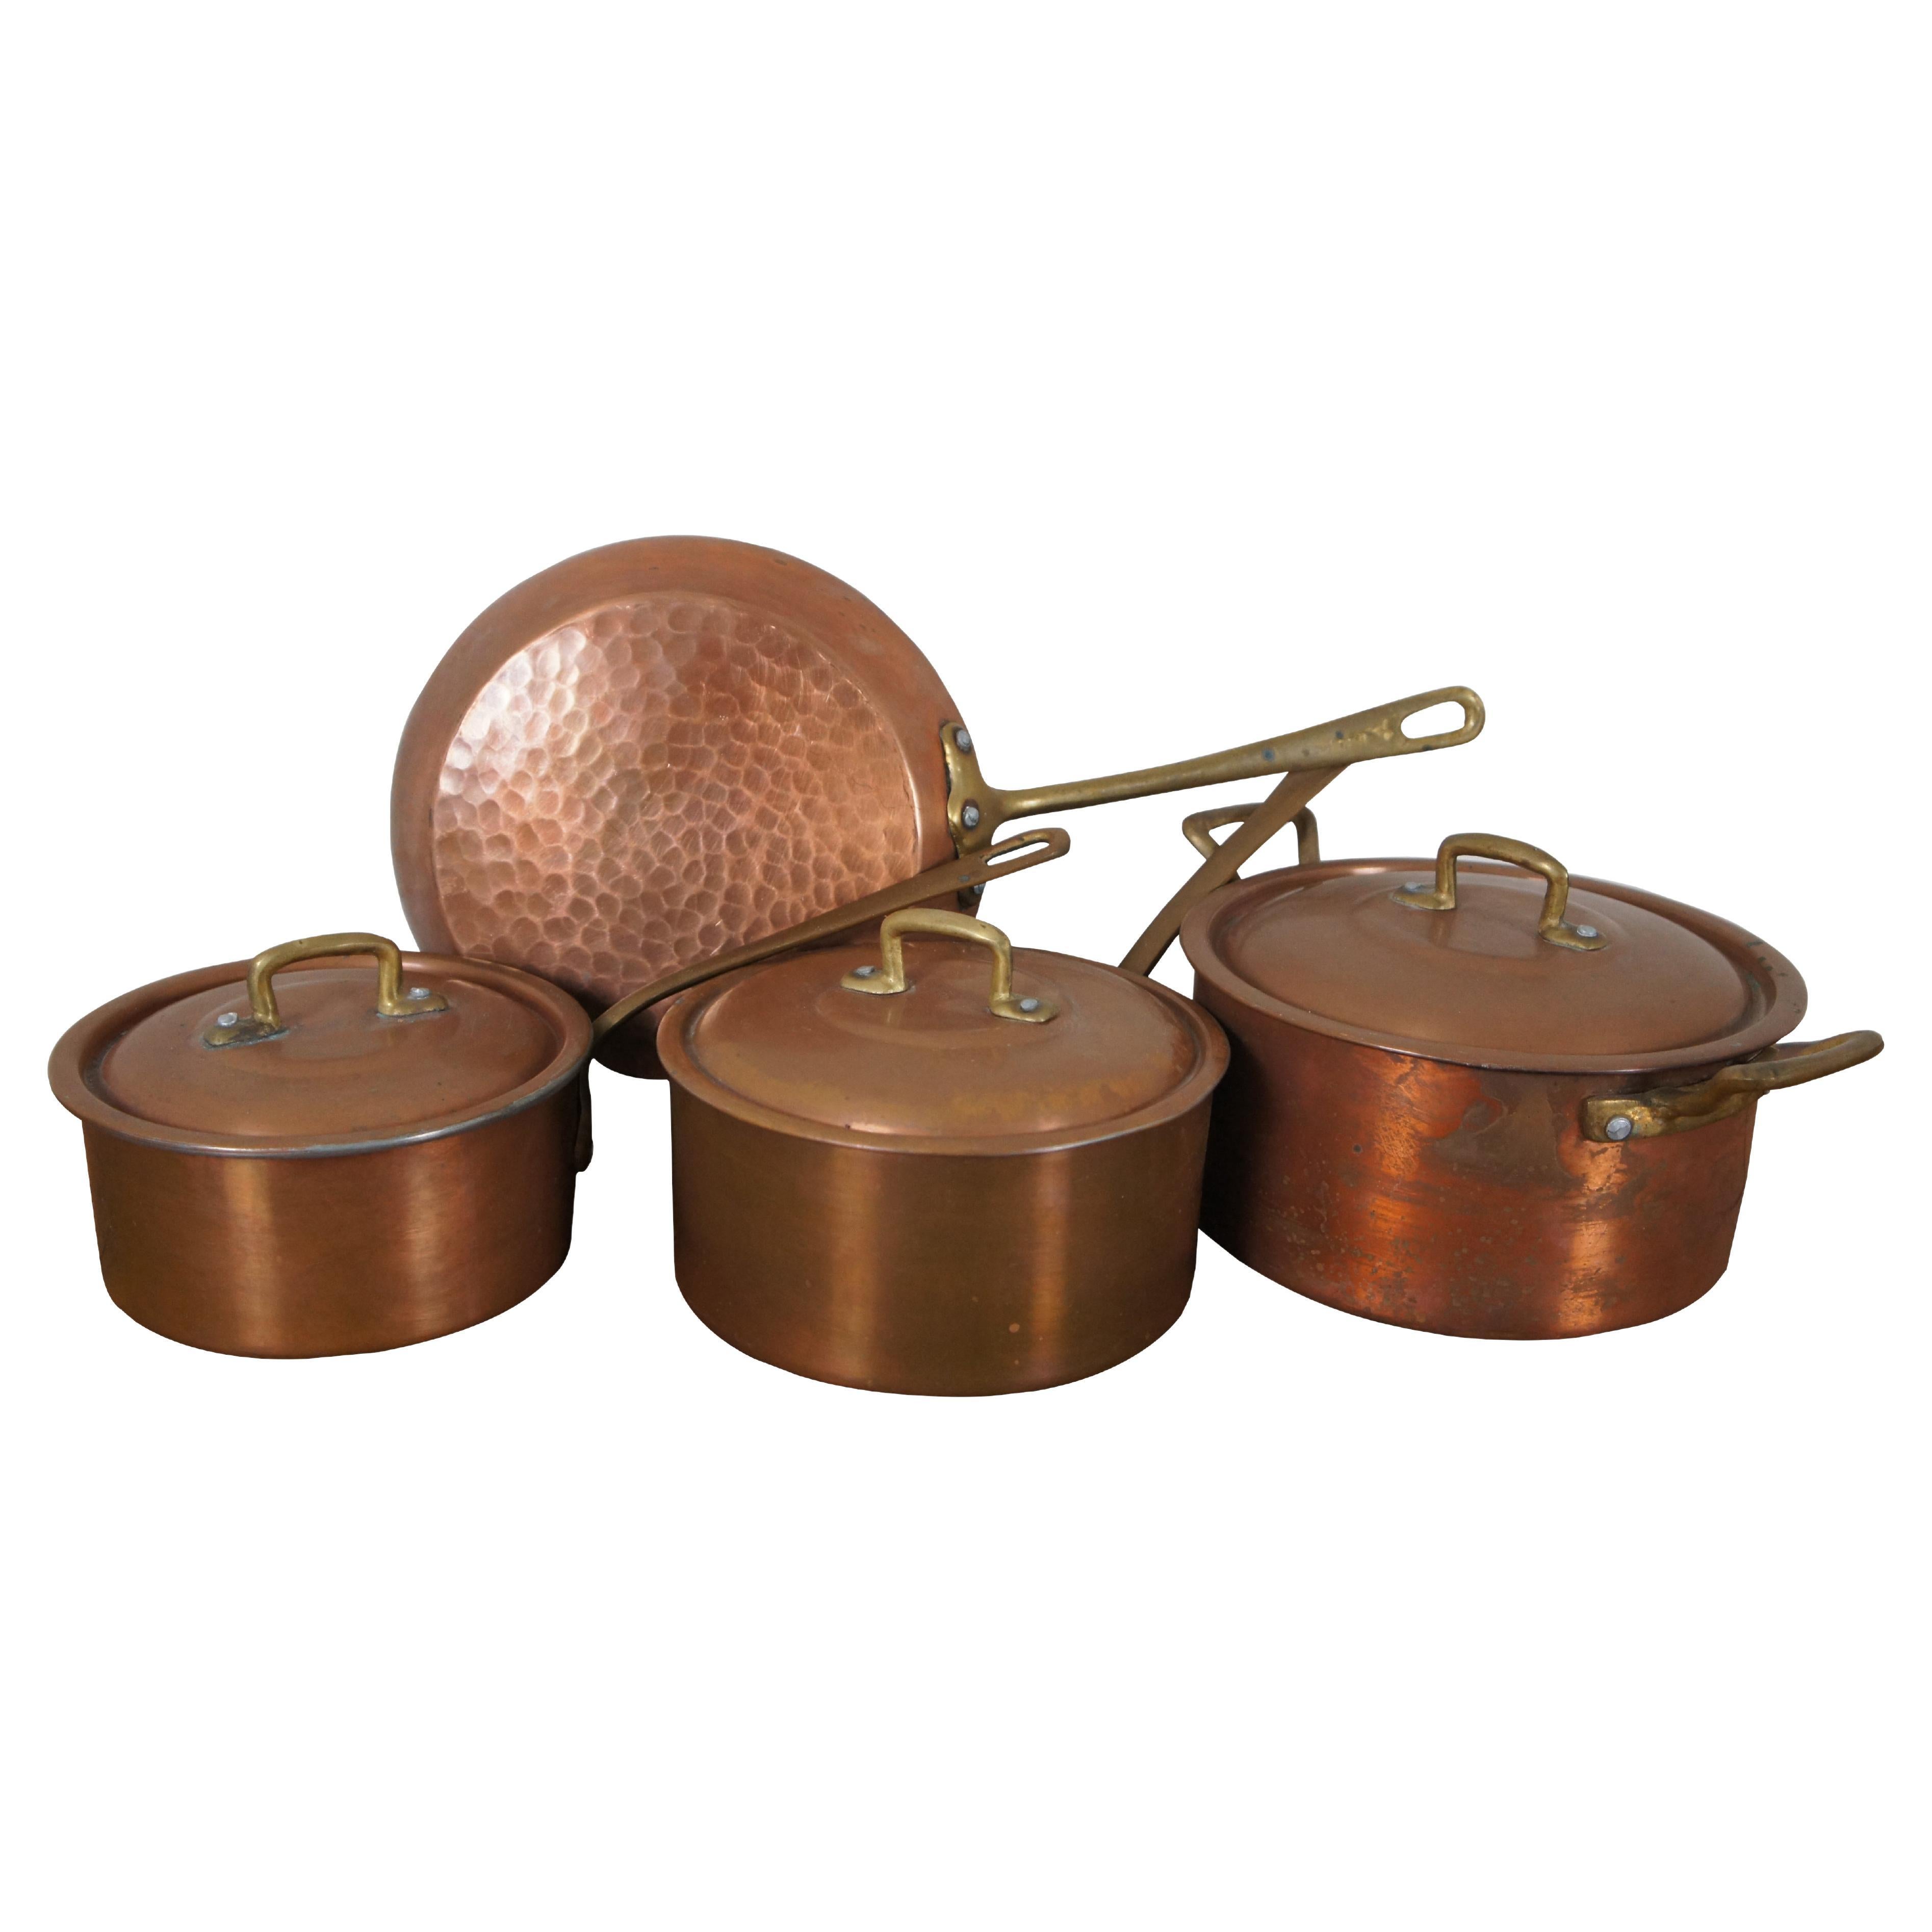 Hammered Red Copper SOUP POT Tin Lined With Lids,copper Cookware, Stock Pot,  French Kitchen Decor, Copper Pot, Cooking Utensils Cooking Gift 